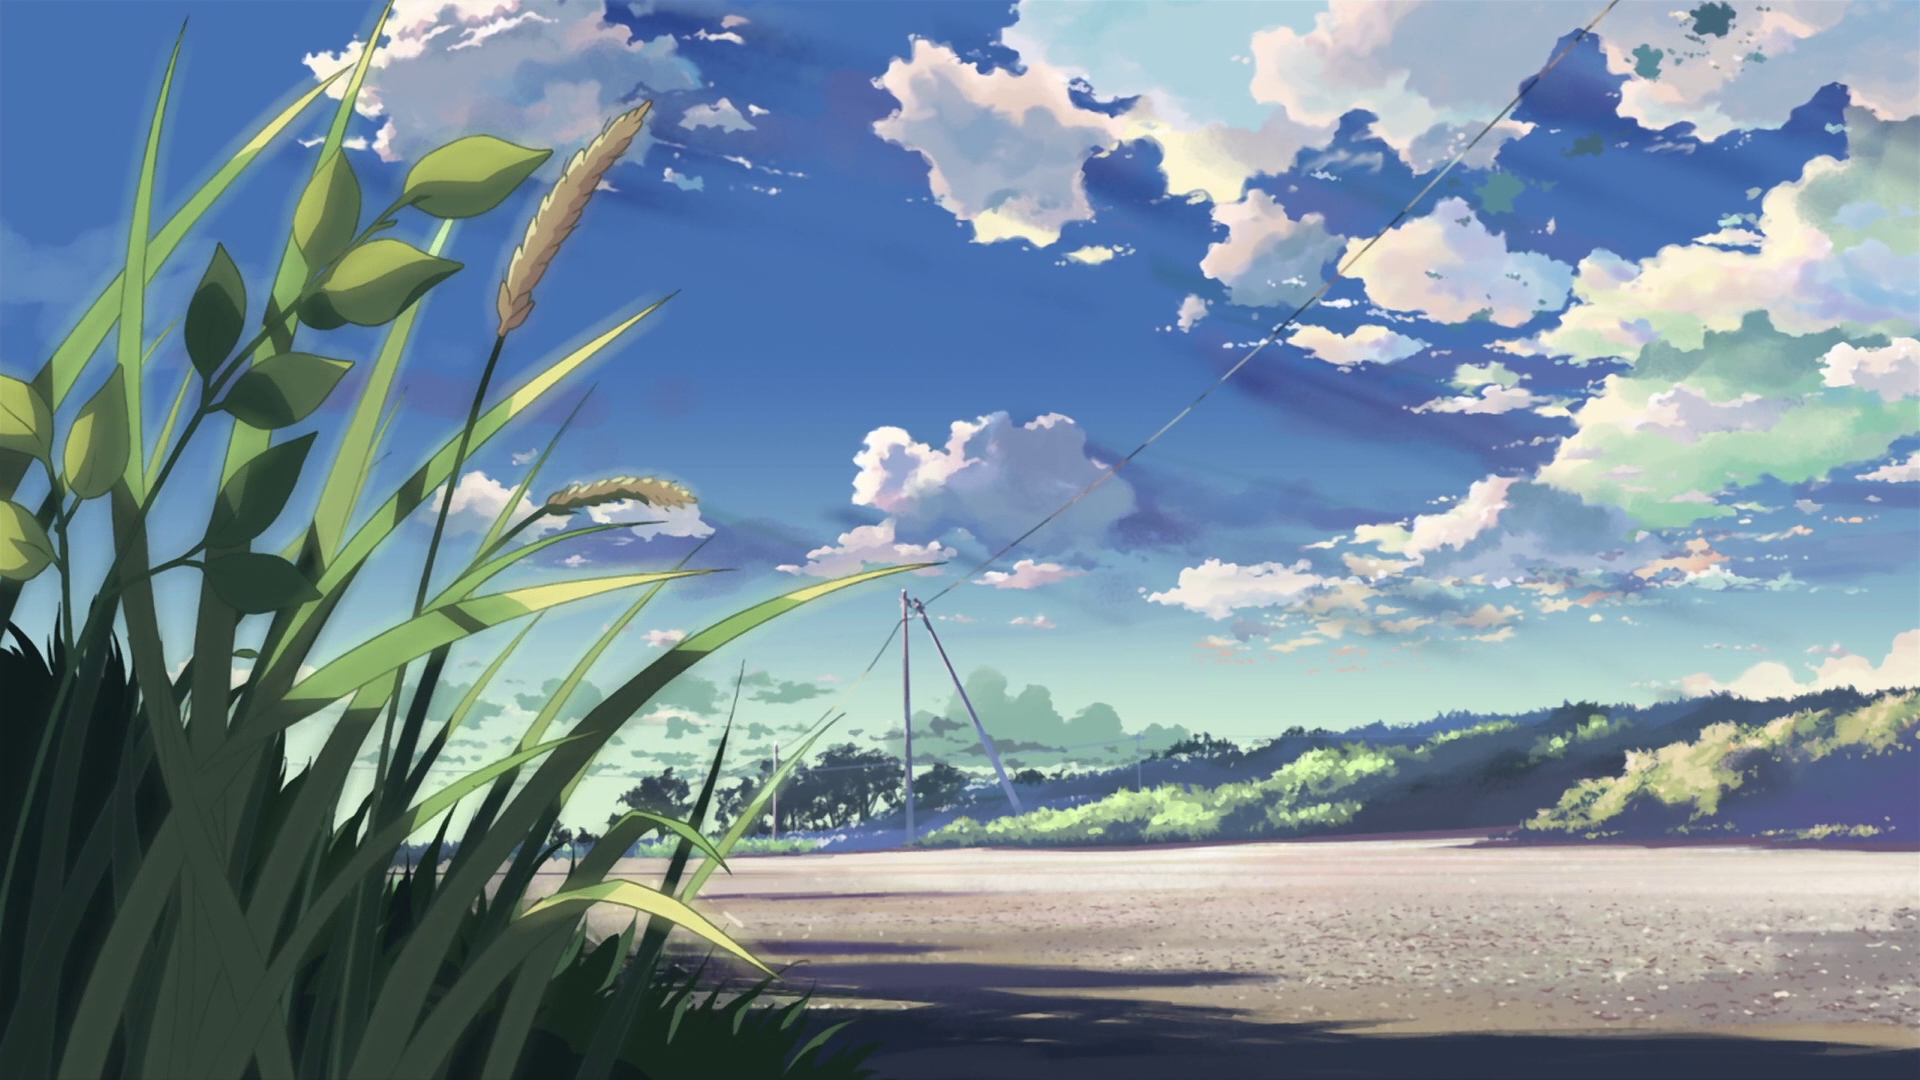 Wallpaper ID 673880  lake post tranquil scene anime illustration  plant scenics  nature trees water outdoors auto post production  filter utility beauty in nature free download